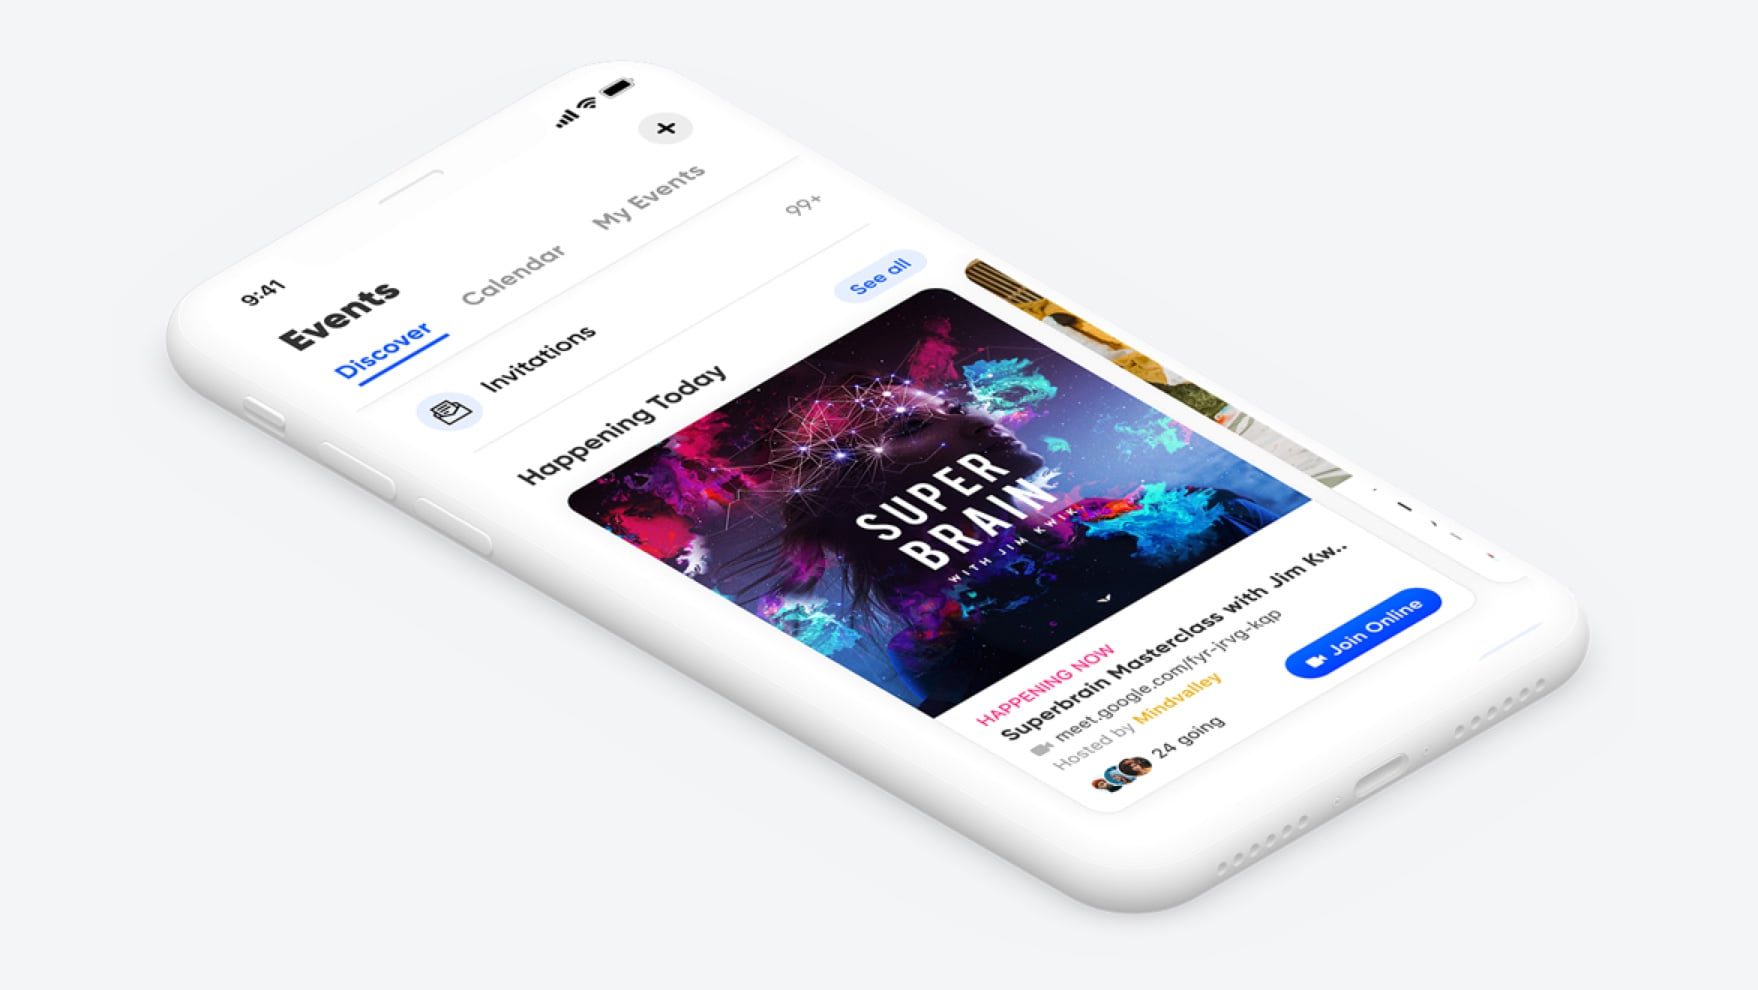 Events section in Mindvalley mobile app